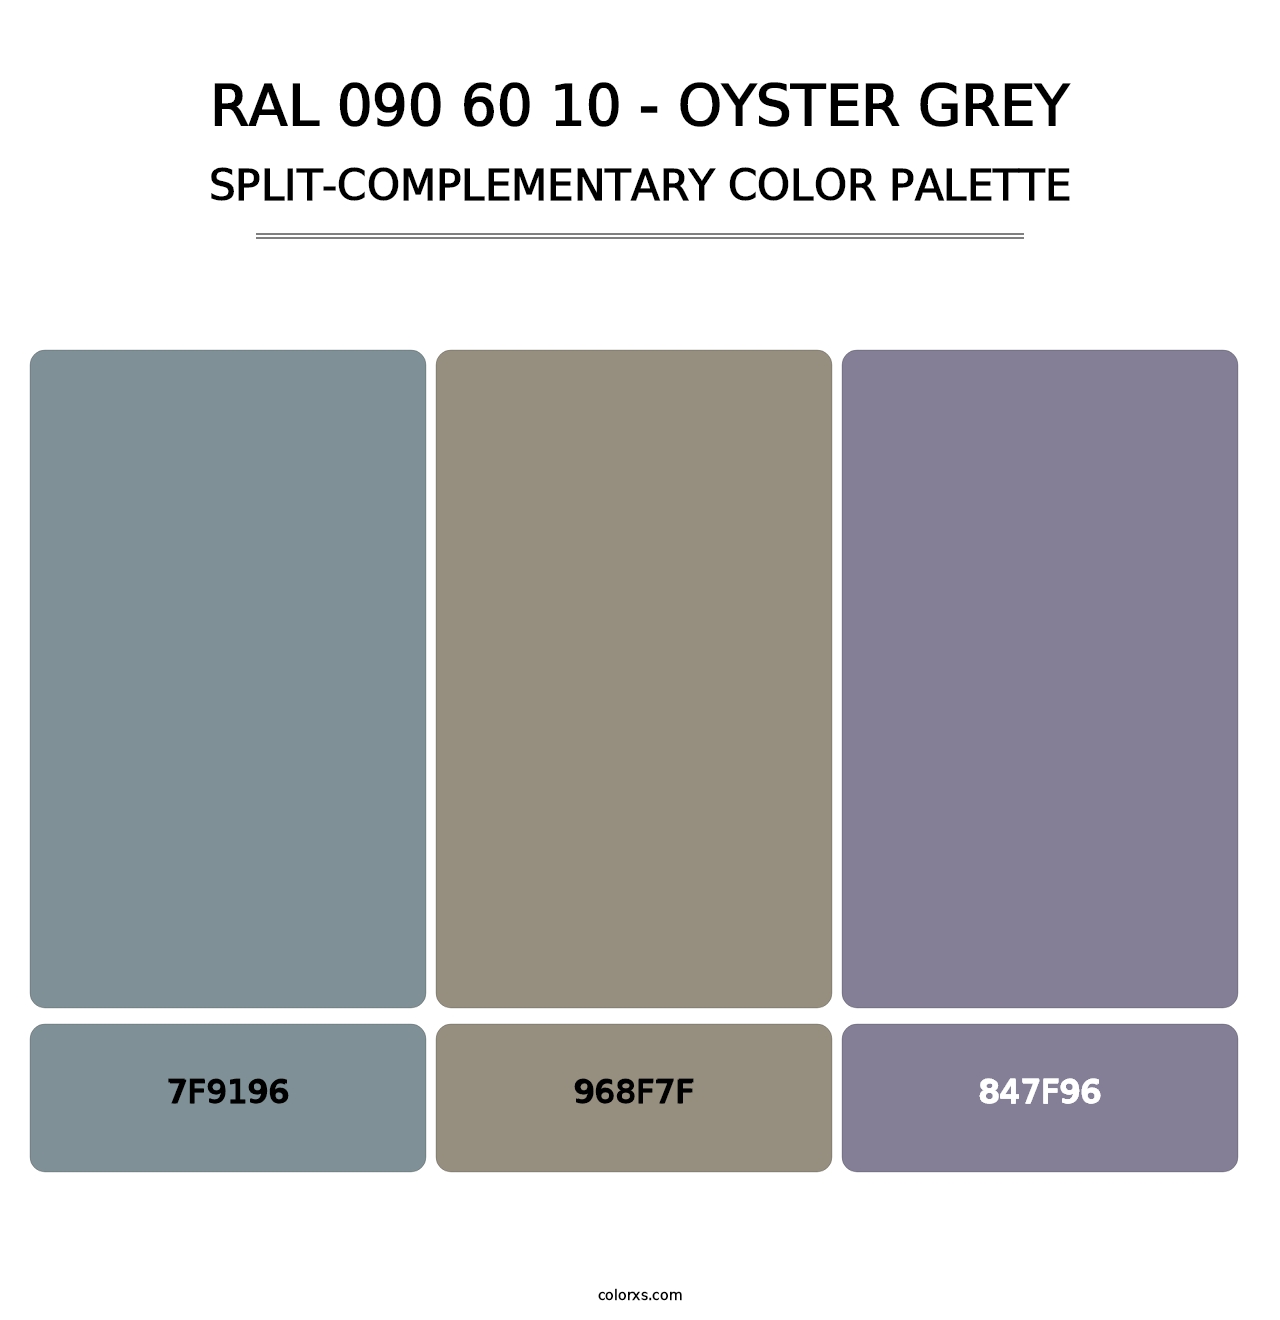 RAL 090 60 10 - Oyster Grey - Split-Complementary Color Palette